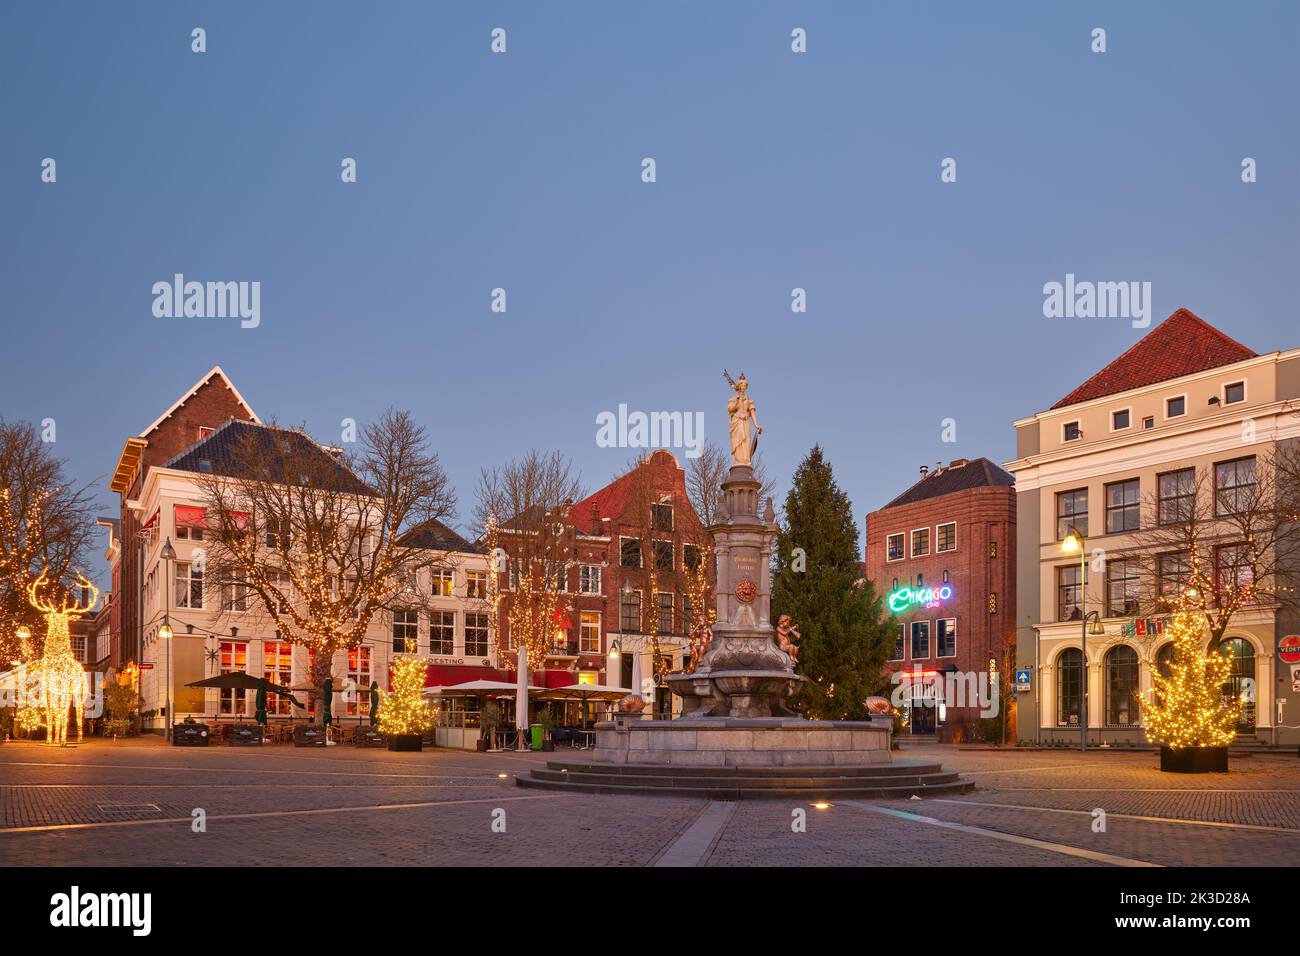 Deventer, The Netherlands - December 20, 2021: The central Brink square in the historic Dutch city Deventer in winter with christmas trees and decorat Stock Photo